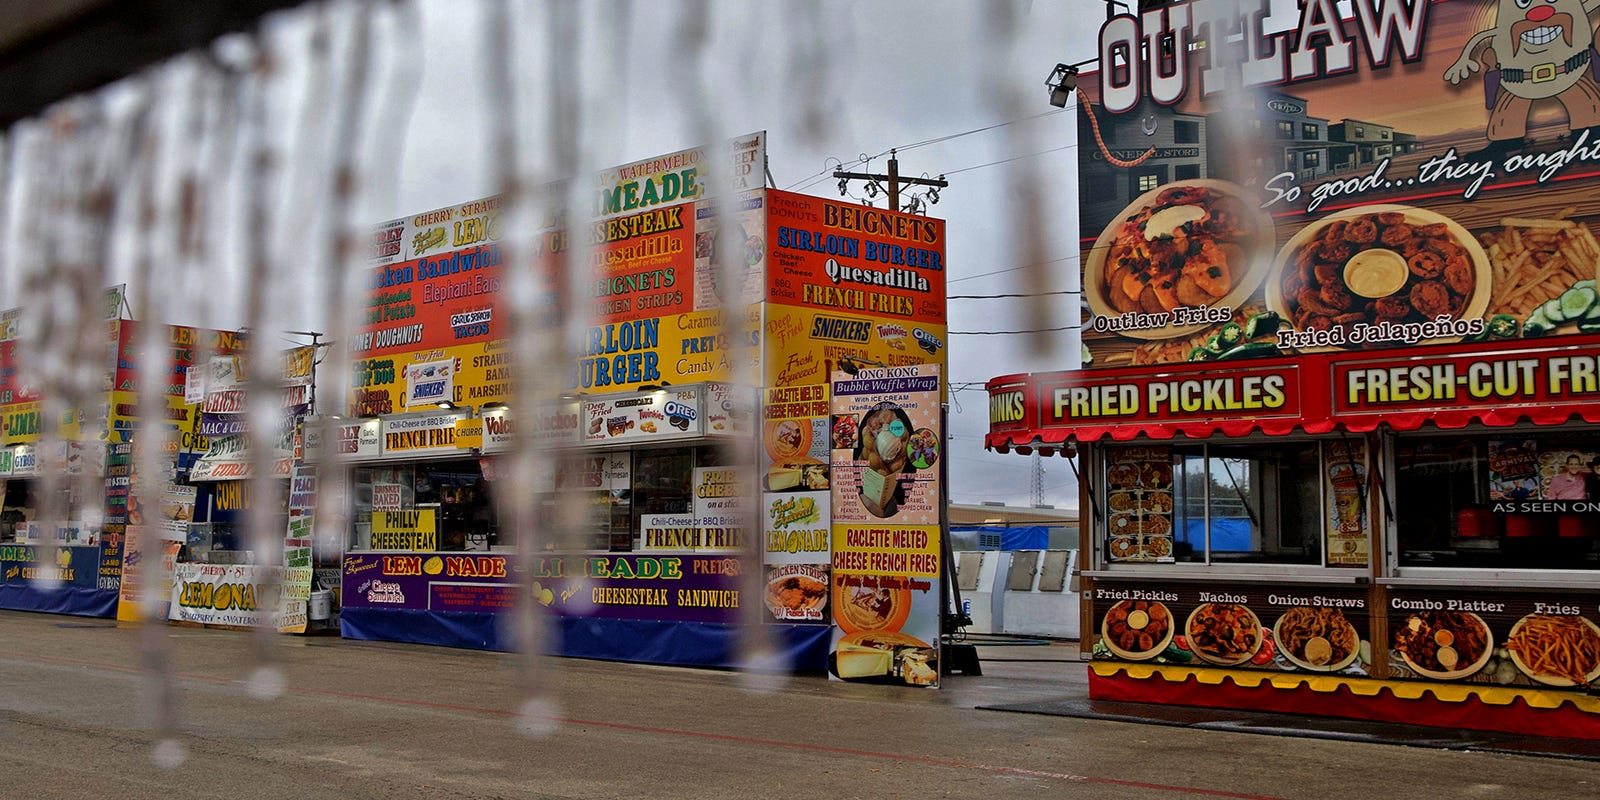 San Angelo carnival closes for weather, will reopen Thursday, Feb. 6